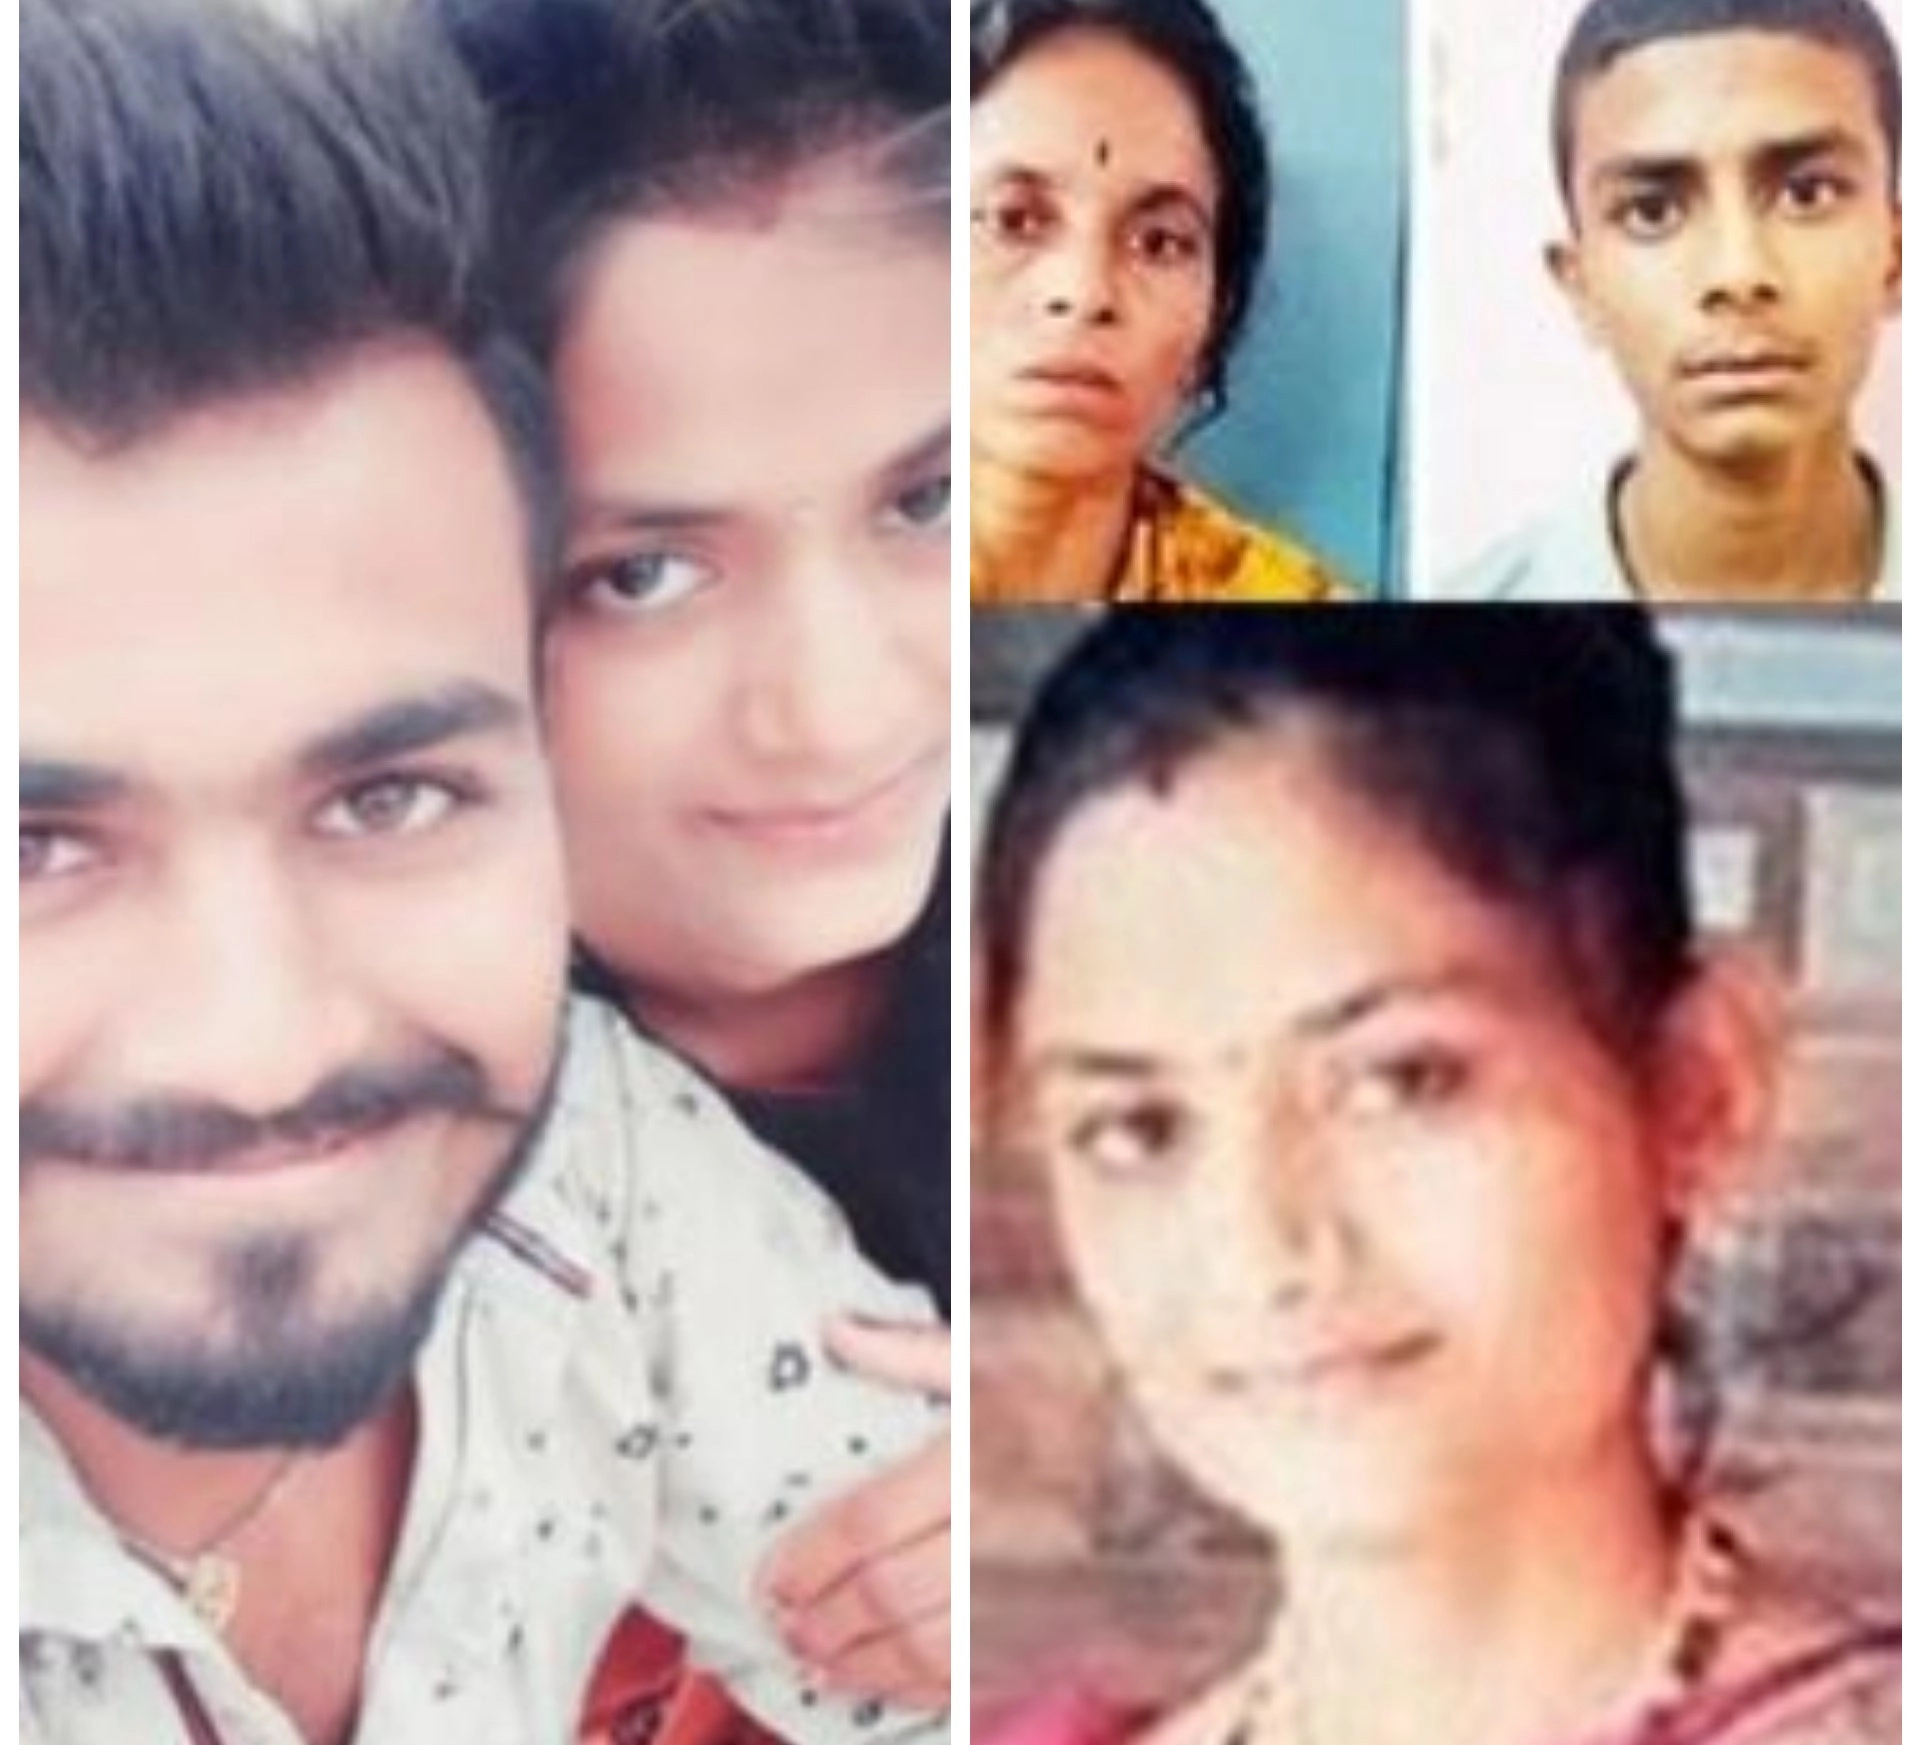 Honour killing: Indian teenager beheads his pregnant 19-year-old sister with help of their mother for marrying without family consent